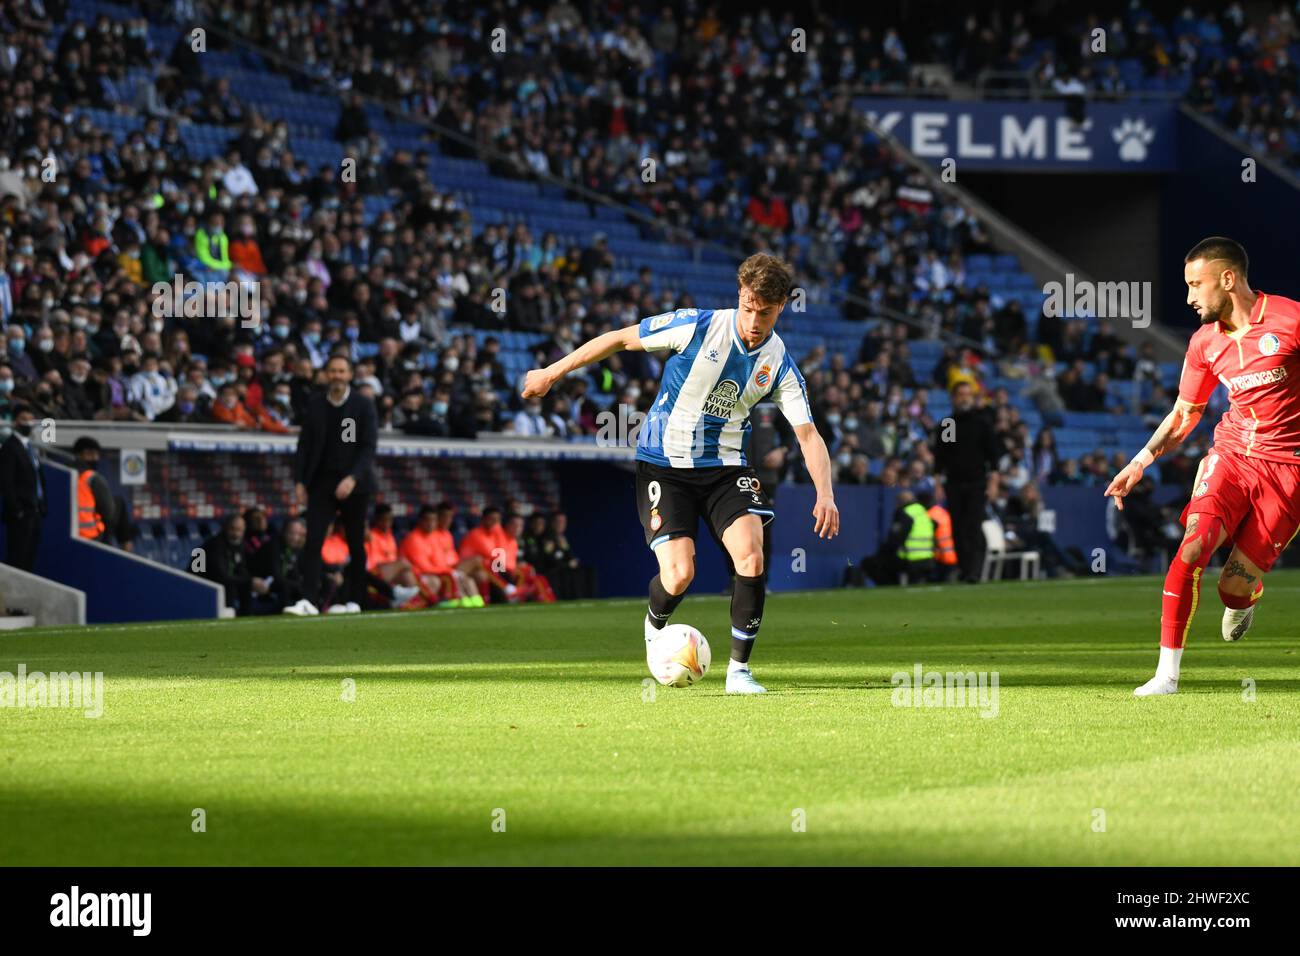 BARCELONA/SPAIN - MARCH 5: Puado of Espanyol drives the ball during La Liga match between Espanyol and Getafe at RCDE Stadium on March 5, 2022 in Barcelona, Spain. (Photo by Sara Aribó/Pximages) Stock Photo